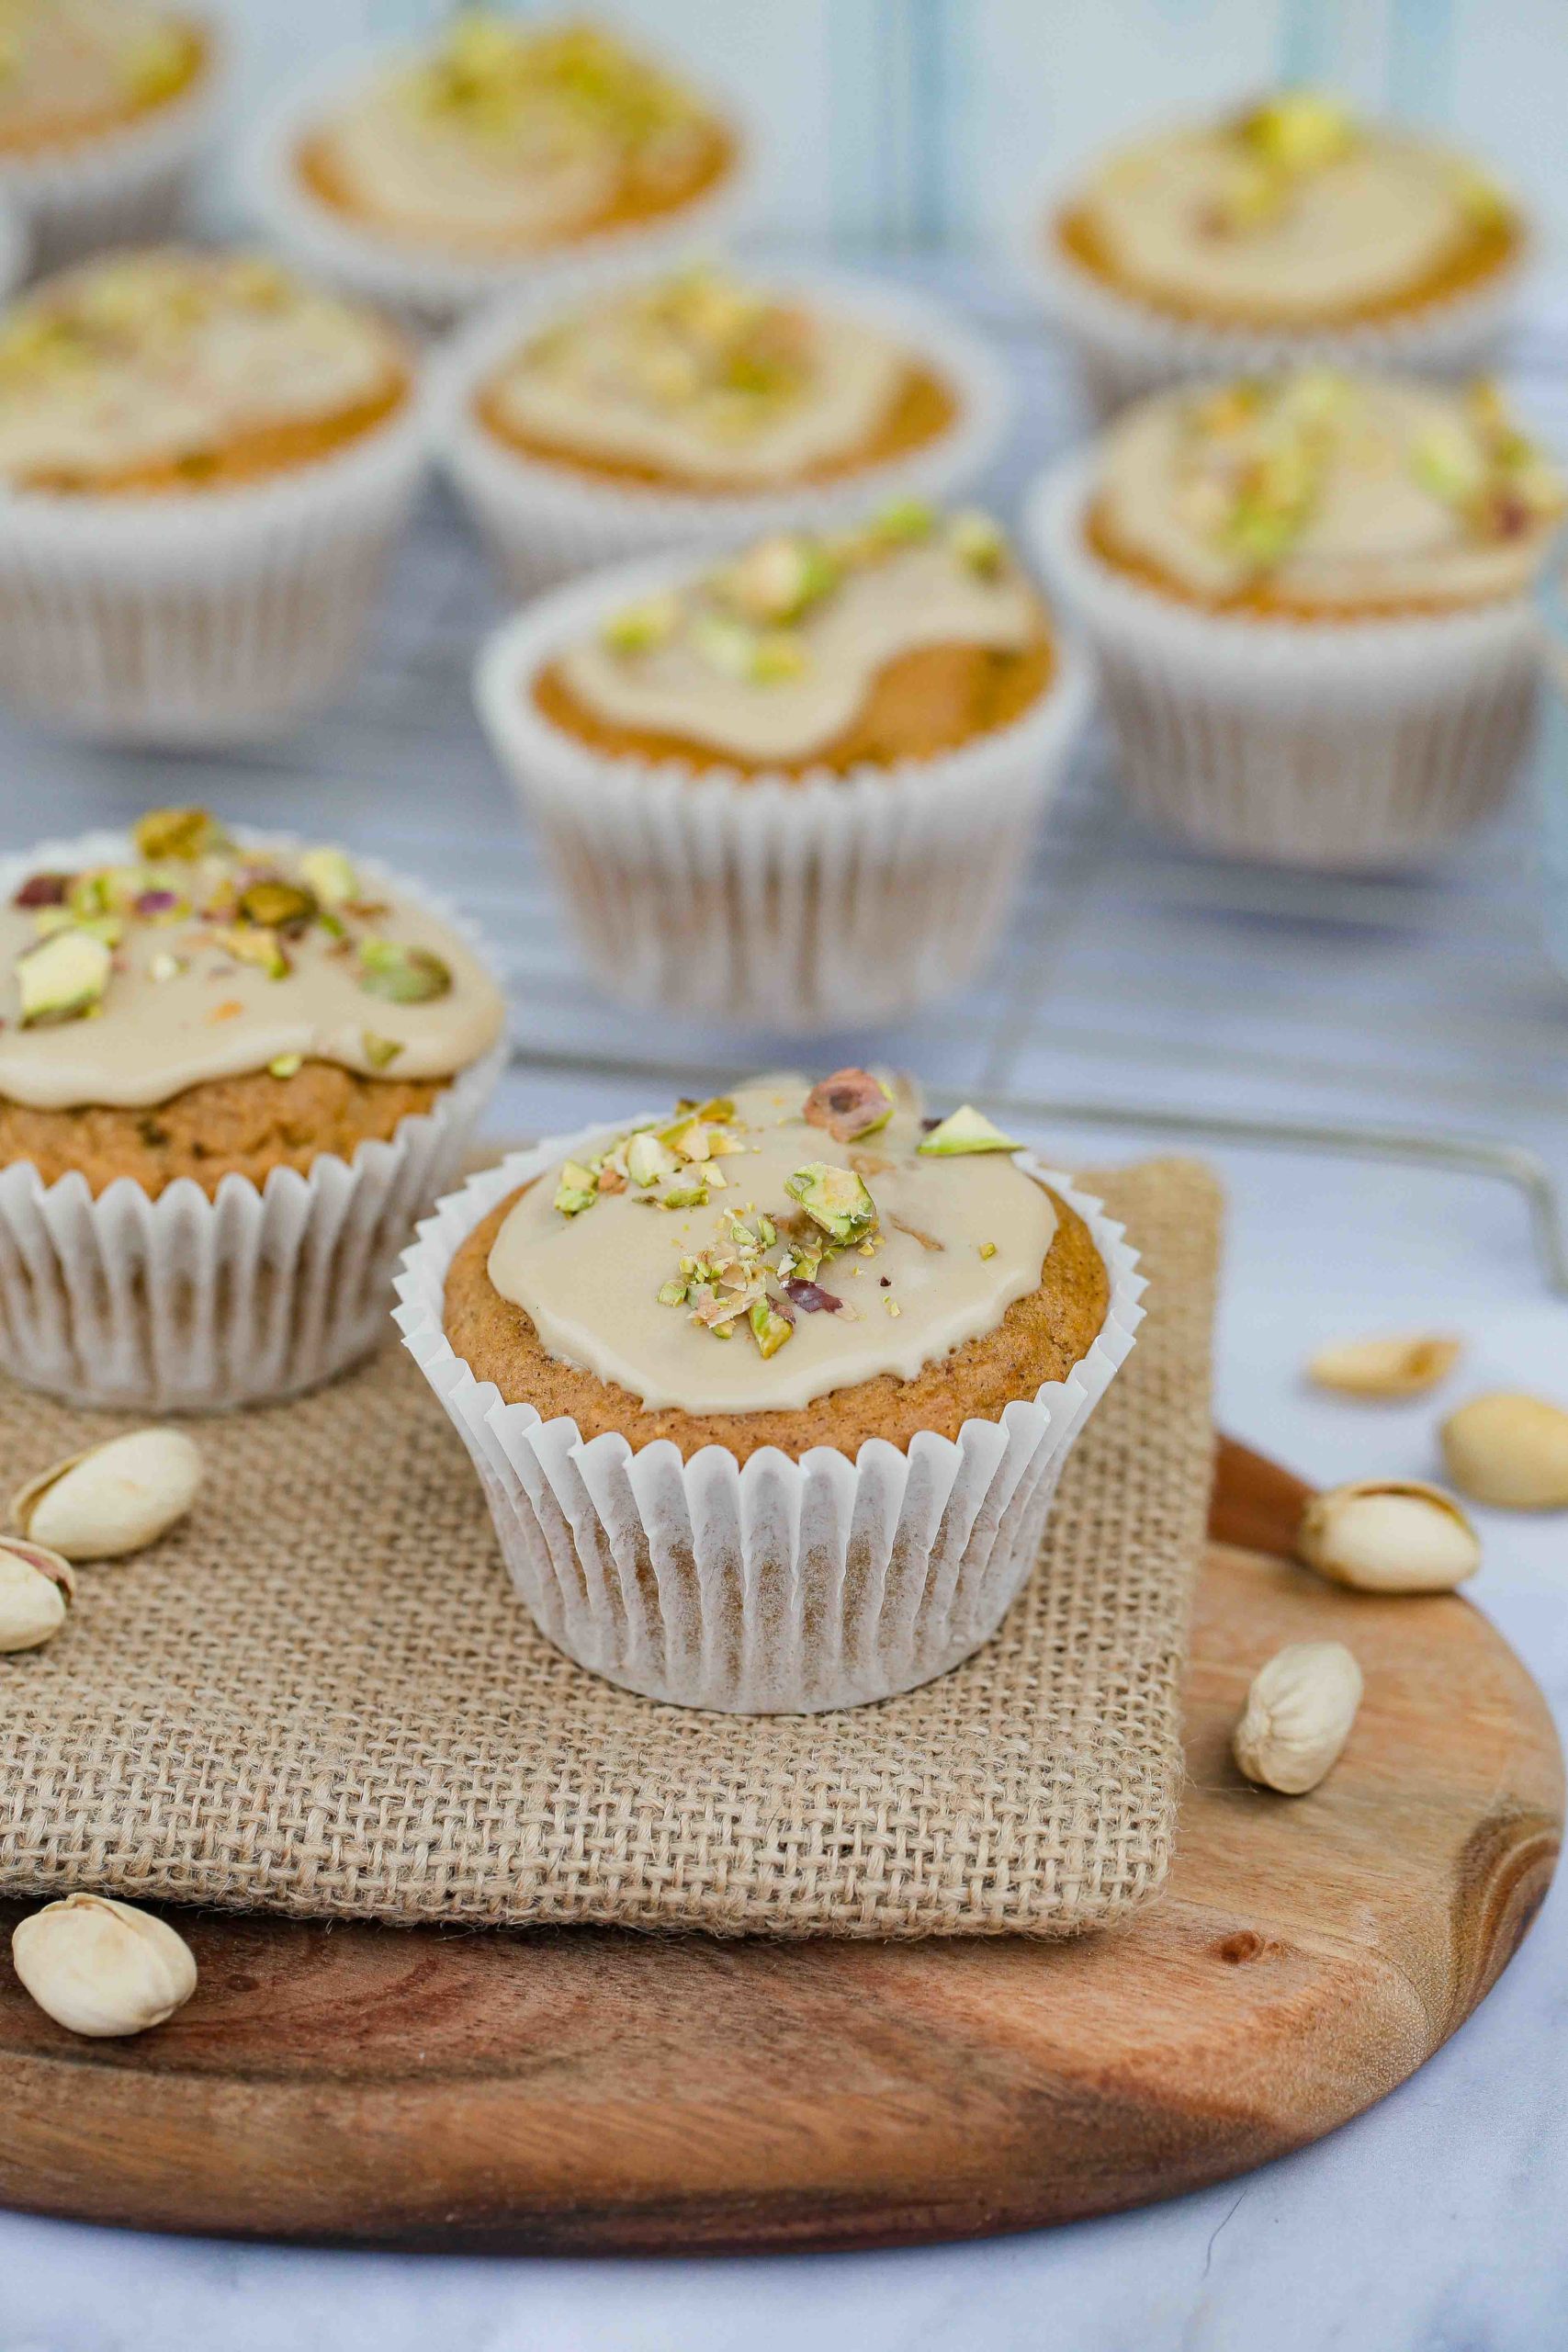 Delicious and super easy vegan carrot cake muffins with all the spice and flavour of carrot cake just in a more portable form! Topped with a lovely lemon icing and chopped pistachios. Enjoy with your morning coffee or as an afternoon treat. Recipe on thecookandhim.com | #carrotmuffins #carrotcakemuffins #muffinrecipe #veganmuffins #snack #vegansnacks